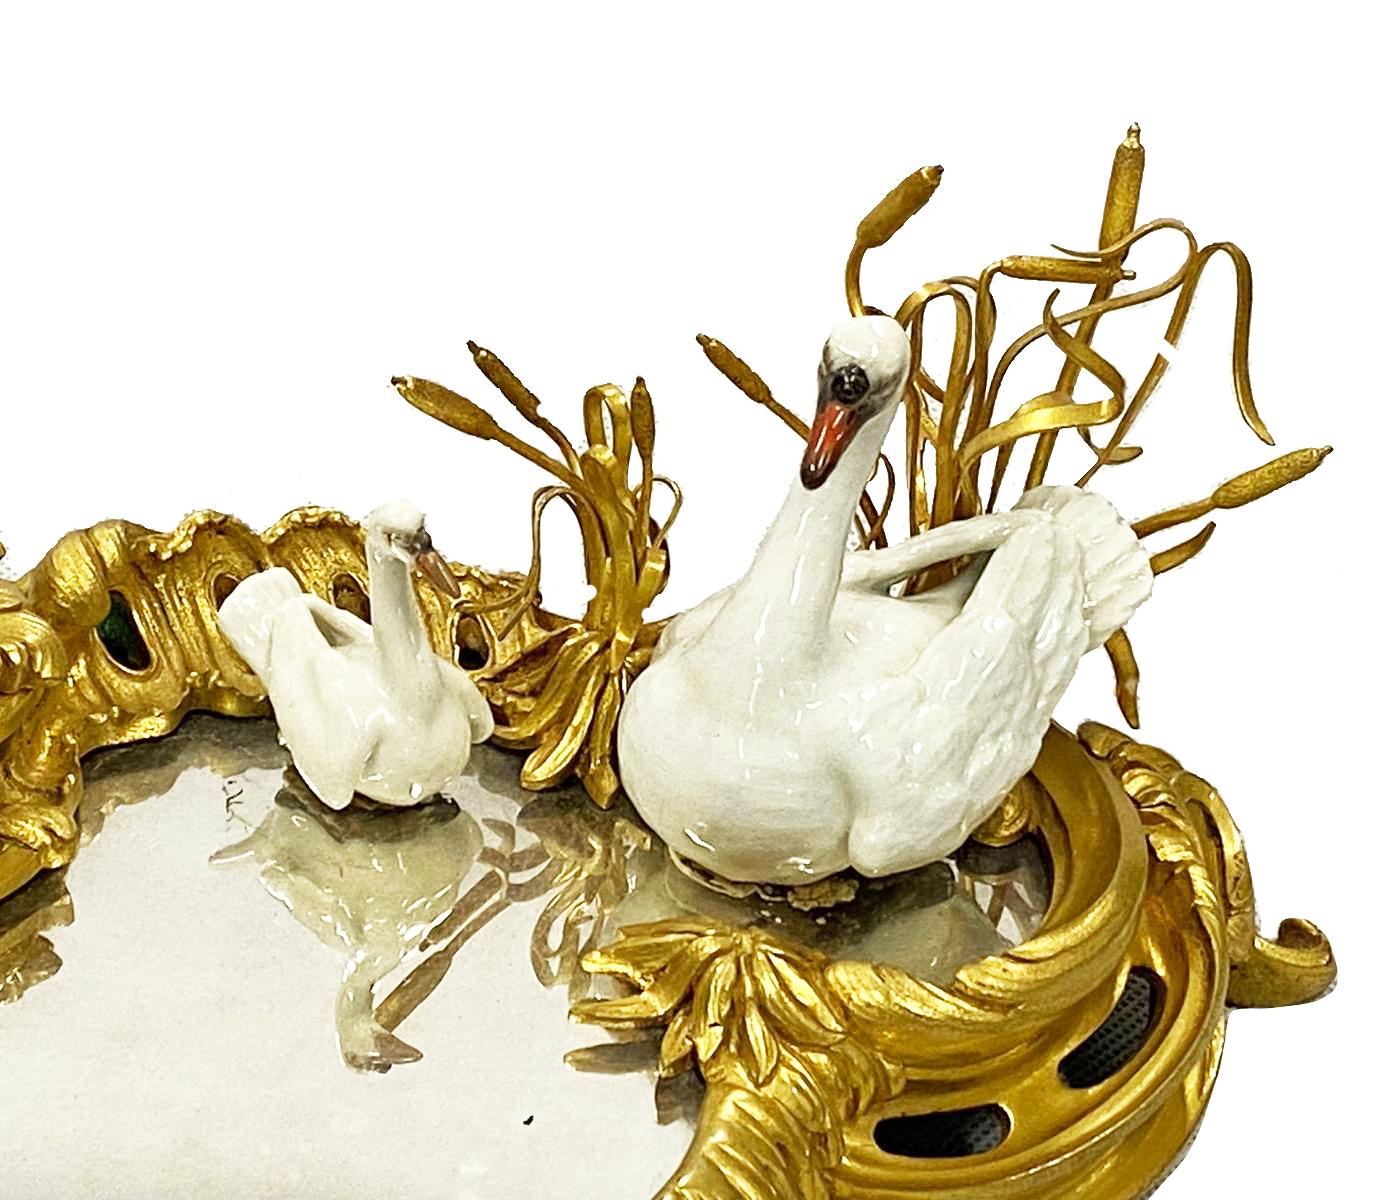 A fine quality late 19th century gilded ormolu Ink well, in the Rococo style, having a hinged lid, a mirrored faux pond with a porcelain Swan and cygnet among reeds. In the manner of Meissen.